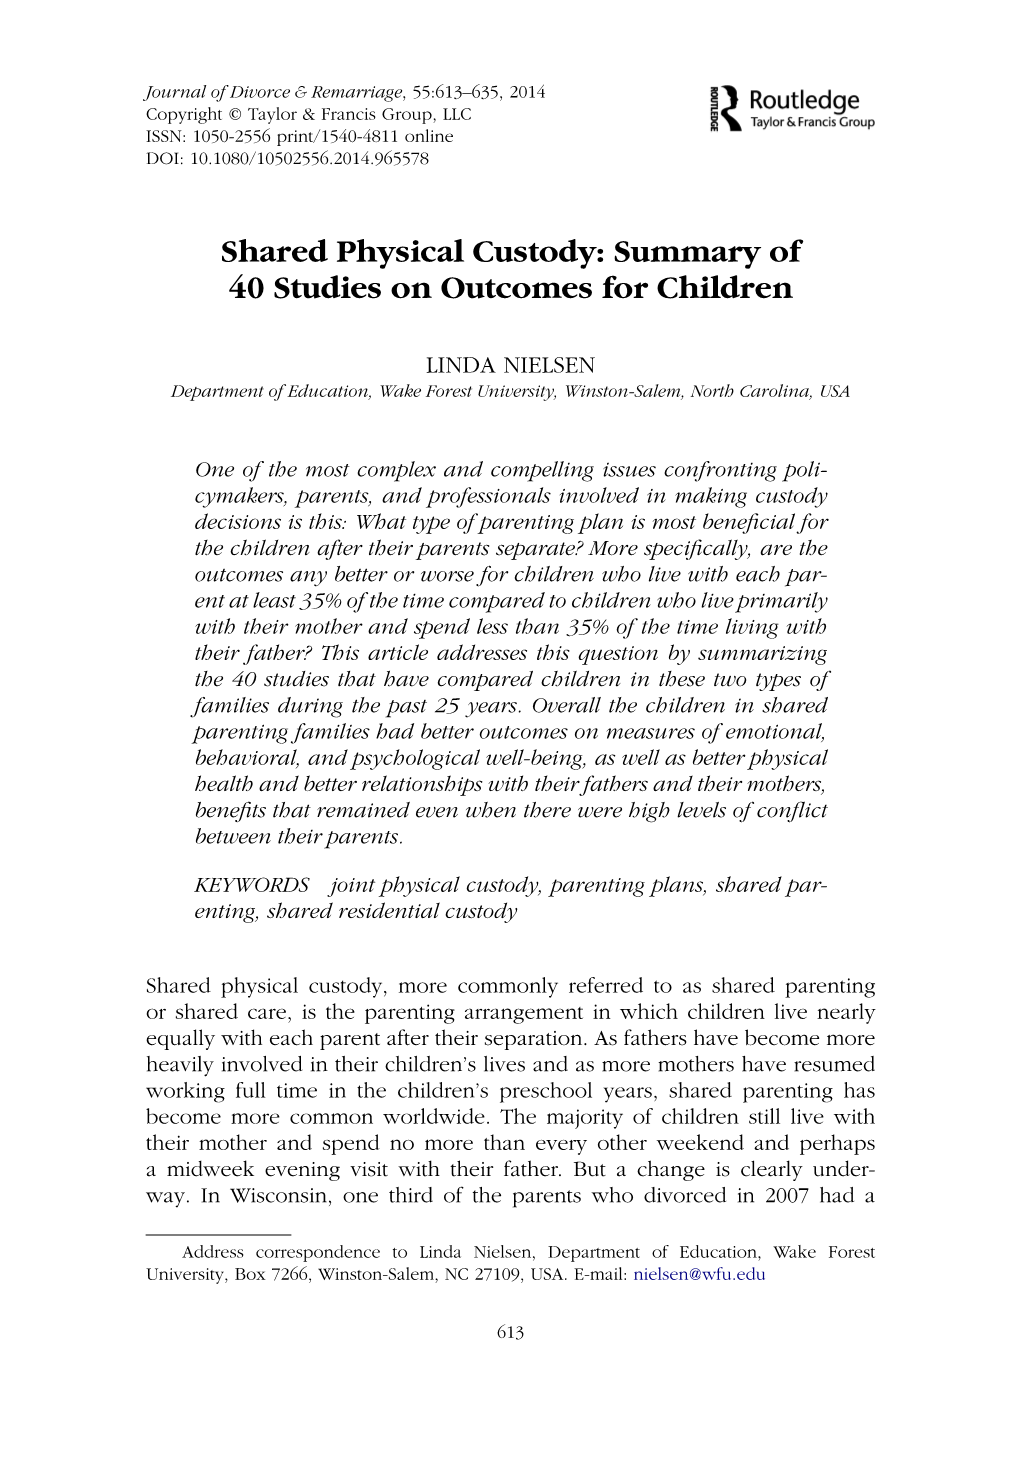 Shared Physical Custody: Summary of 40 Studies on Outcomes for Children